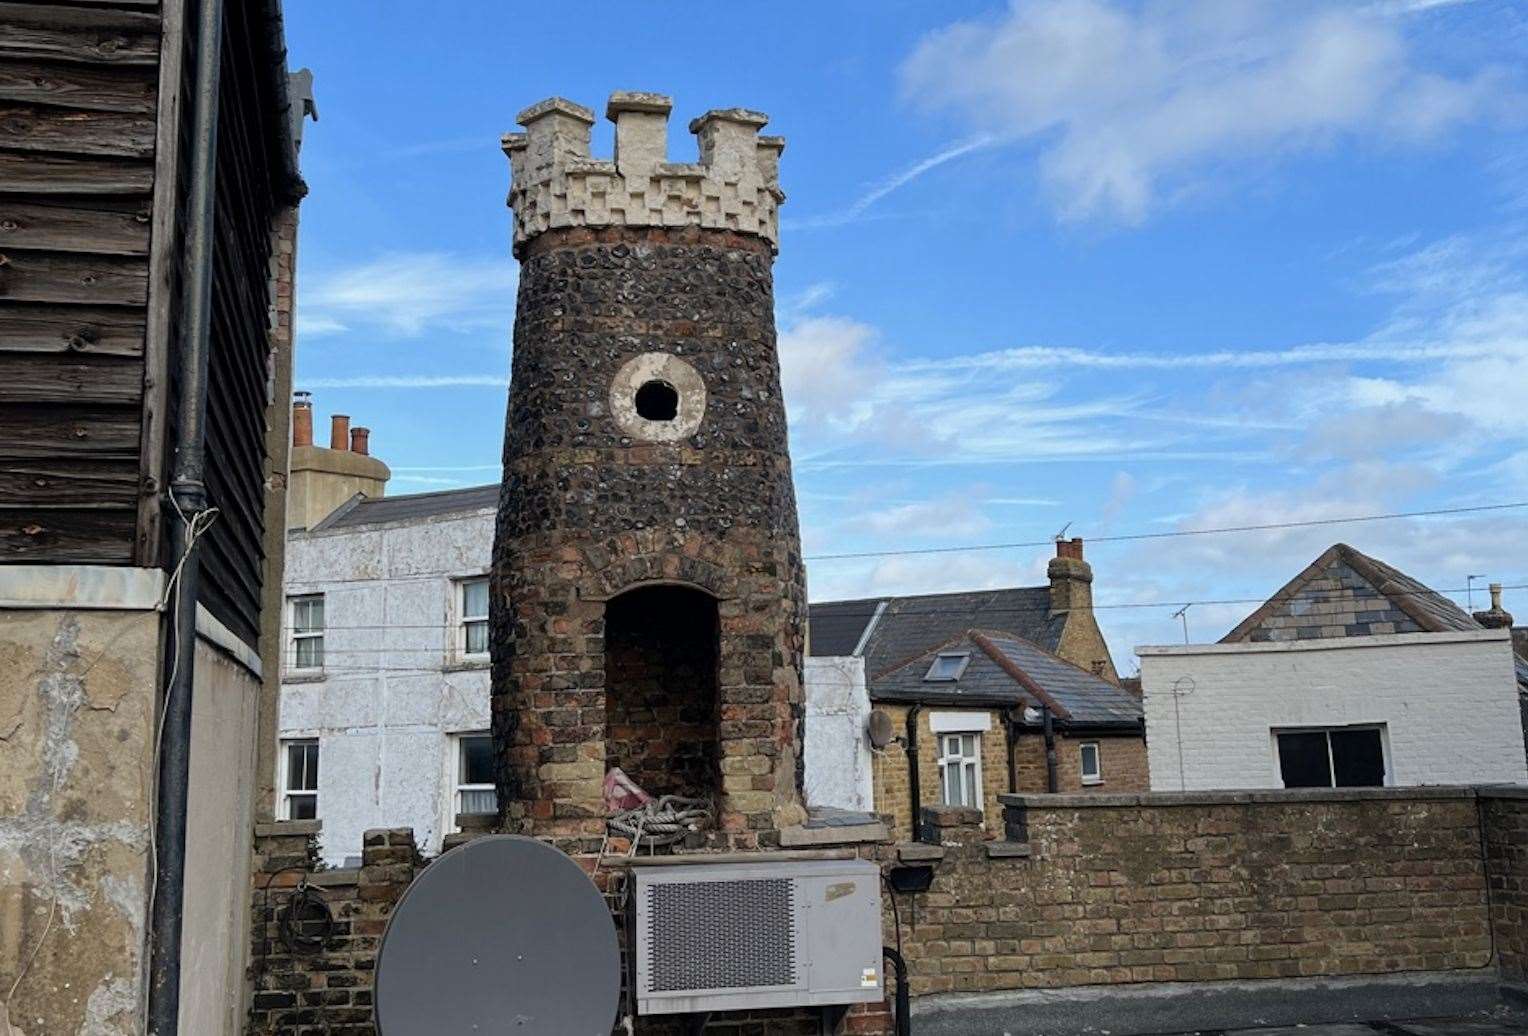 The turret was added on as part of one of the buildings many extensions